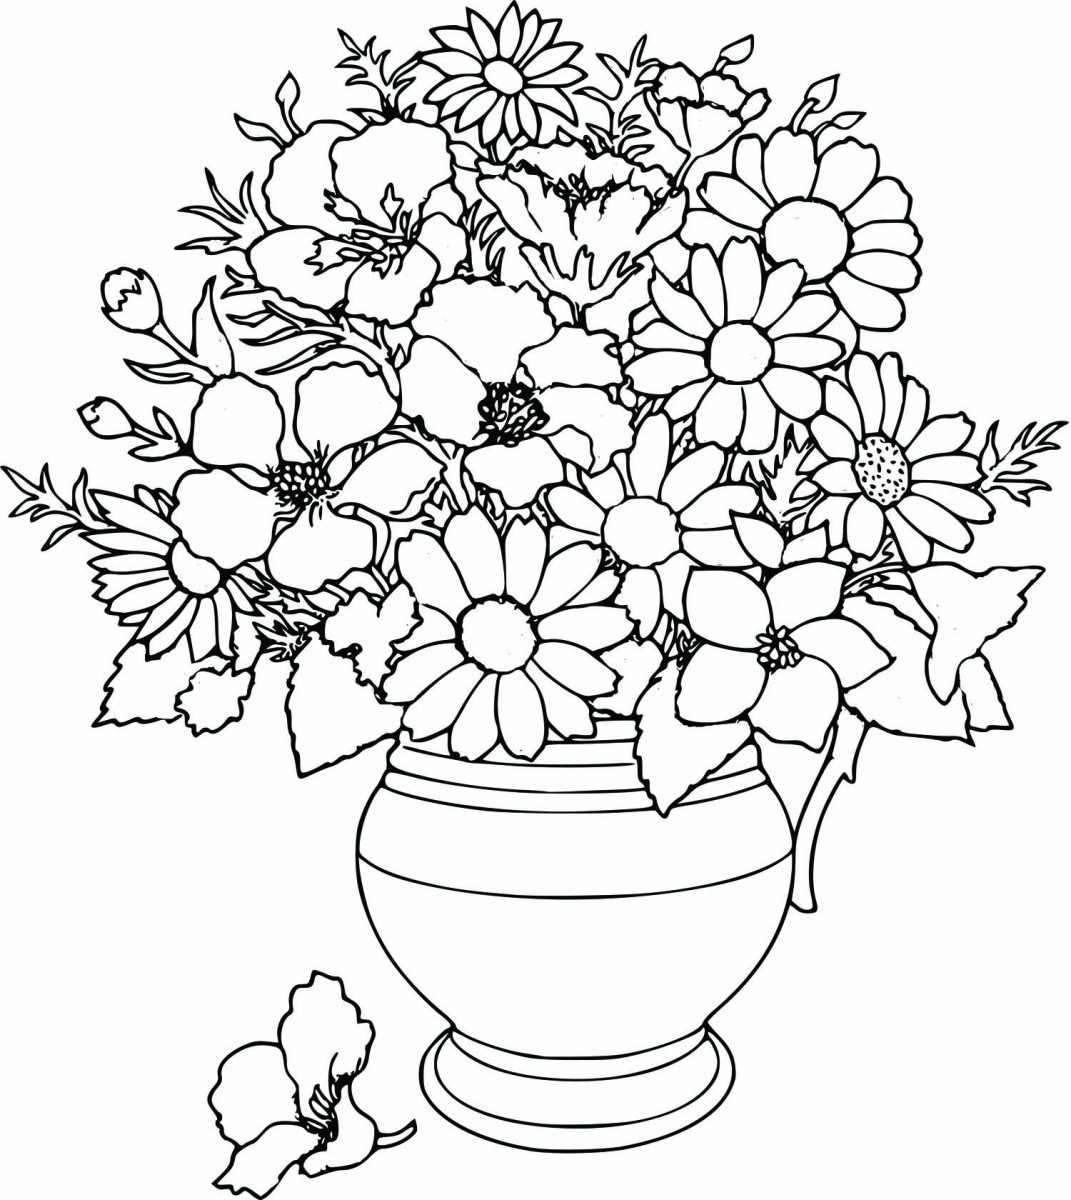 Cute Flower Coloring Pages at GetColorings.com | Free printable ...